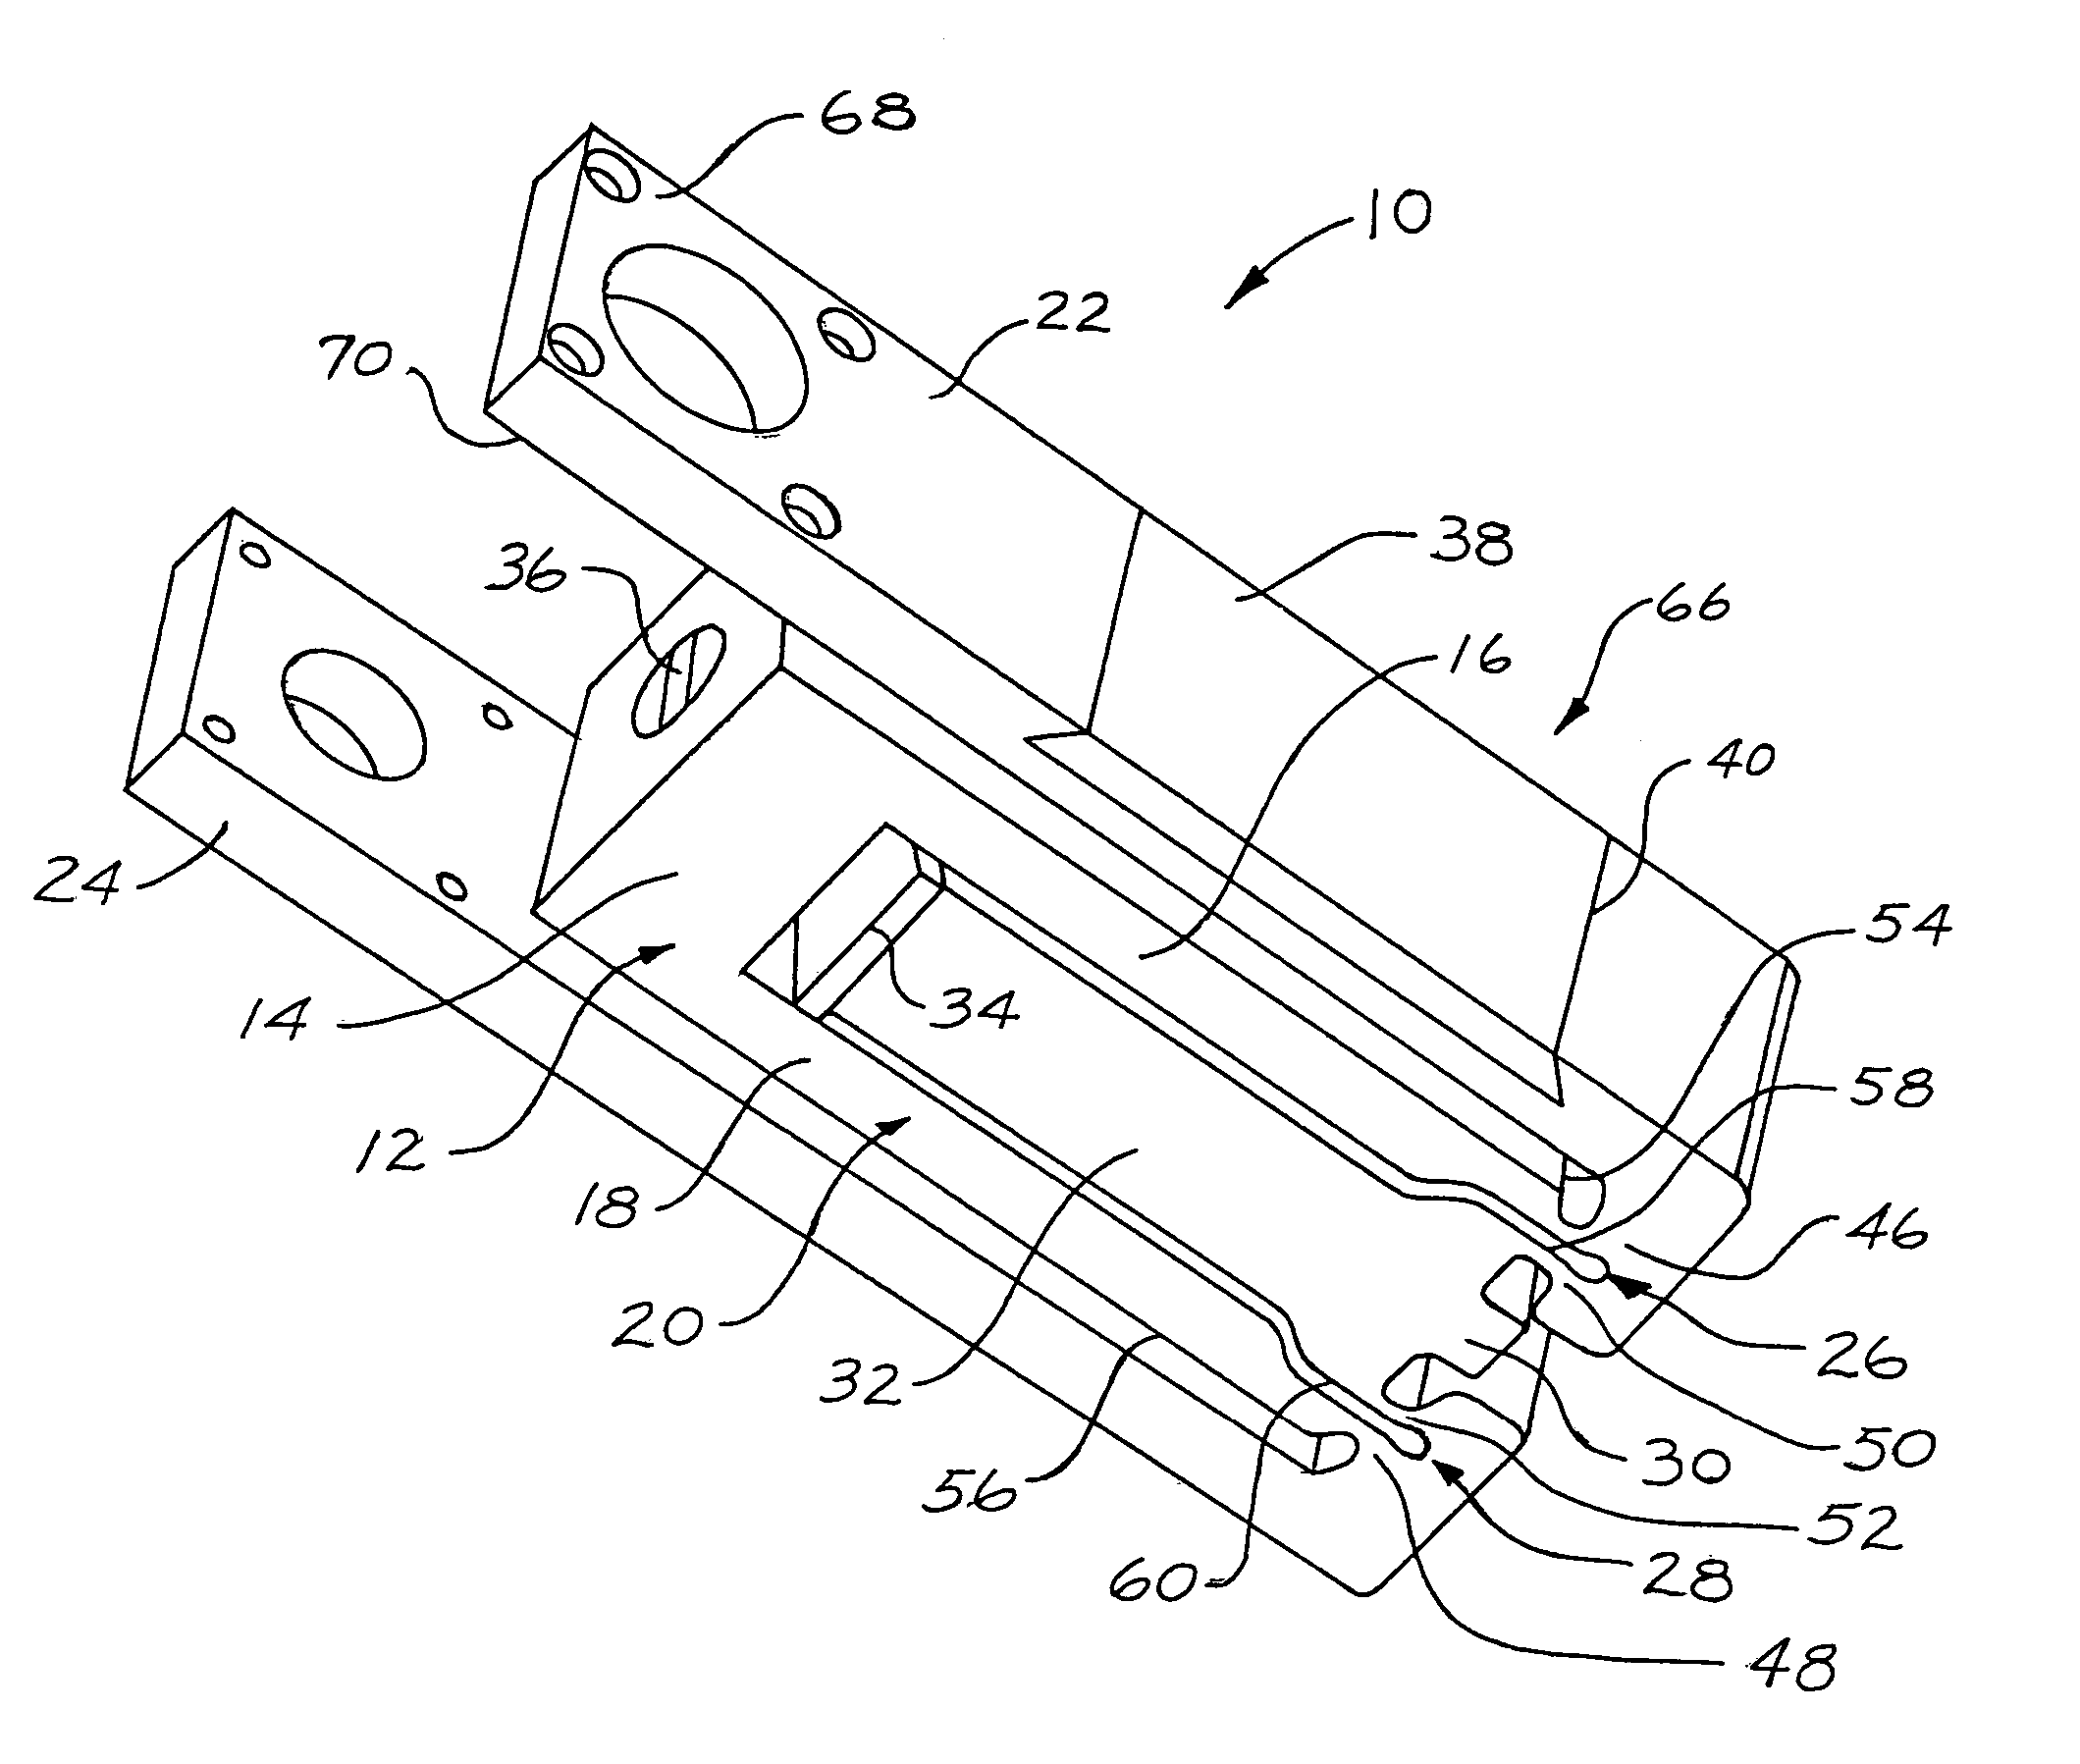 Temperature compensating insert for a mechanically leveraged smart material actuator